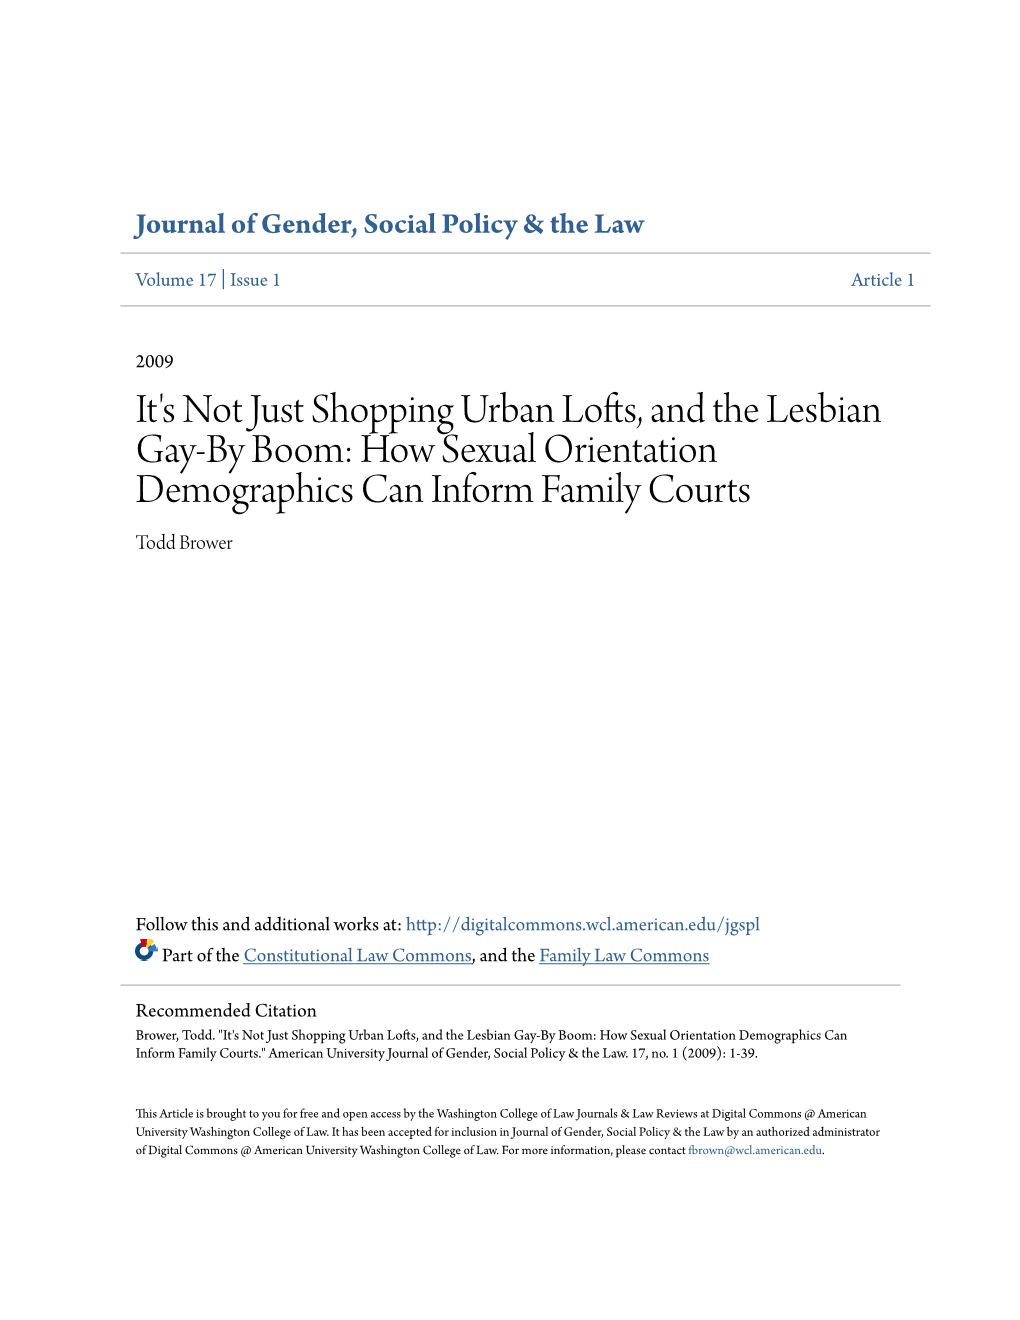 It's Not Just Shopping Urban Lofts, and the Lesbian Gay-By Boom: How Sexual Orientation Demographics Can Inform Family Courts Todd Brower